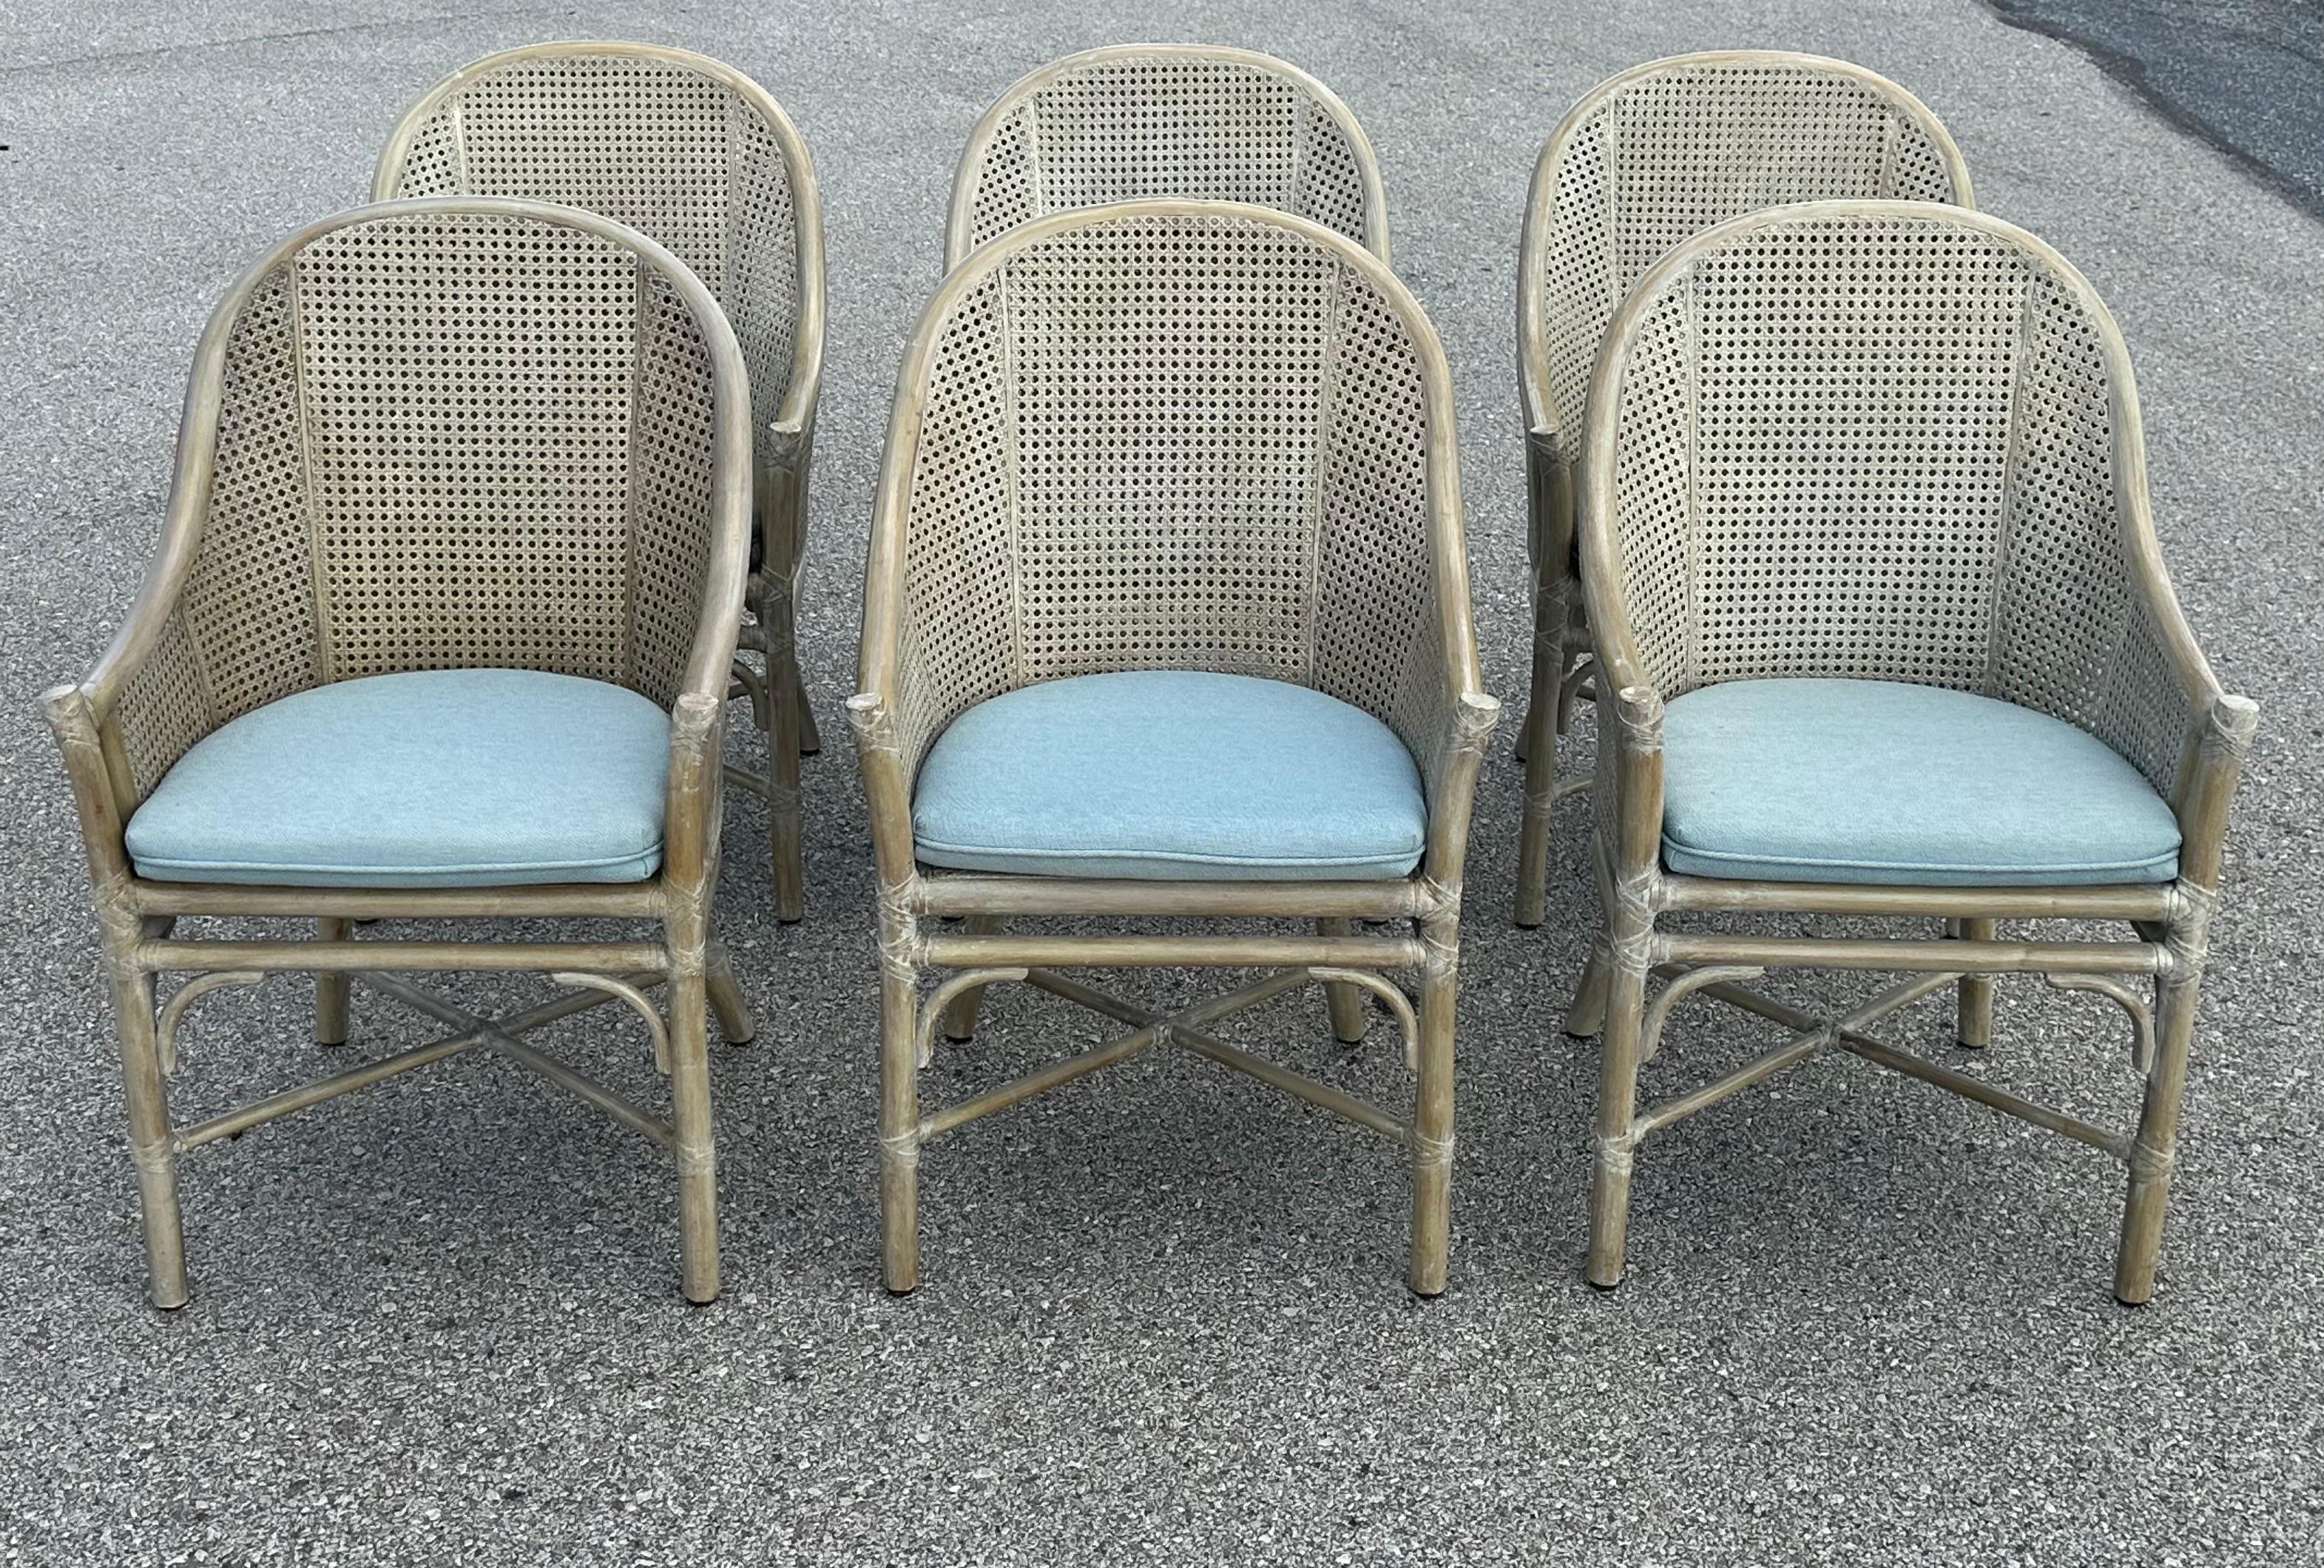 Nice late 1970s vintage set of 6, California casual designed McGuire San Francisco dining chairs made of bent rattan and caning with loose upholstered seat. Feature a barrel back, X stretcher and McGuire innovation of double caning on the back and